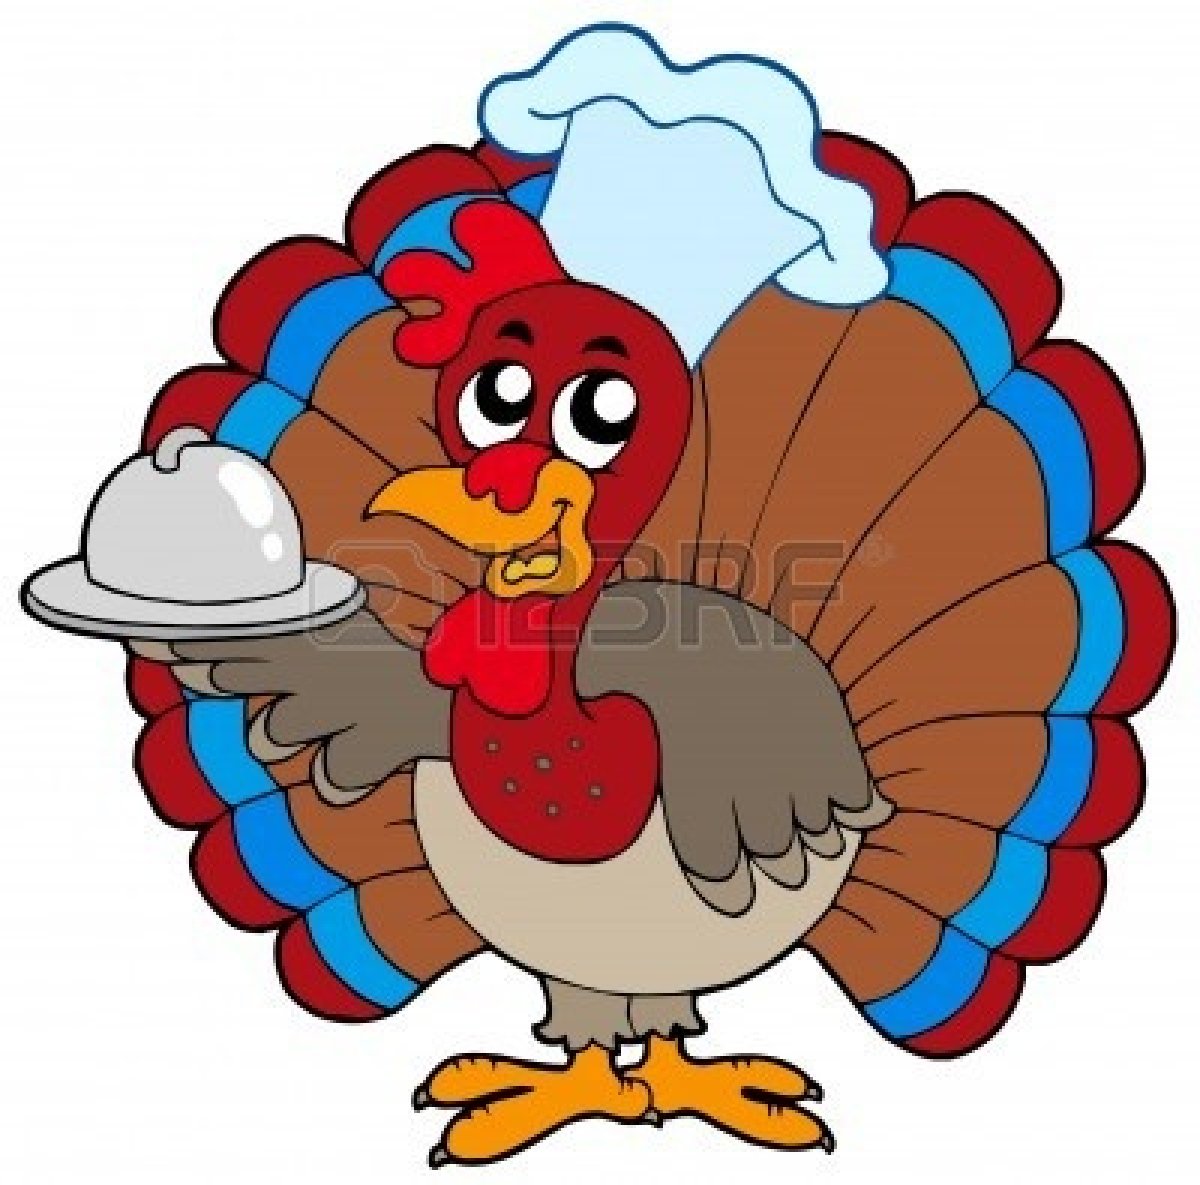 Turkey Dinner Plate   Clipart Panda   Free Clipart Images